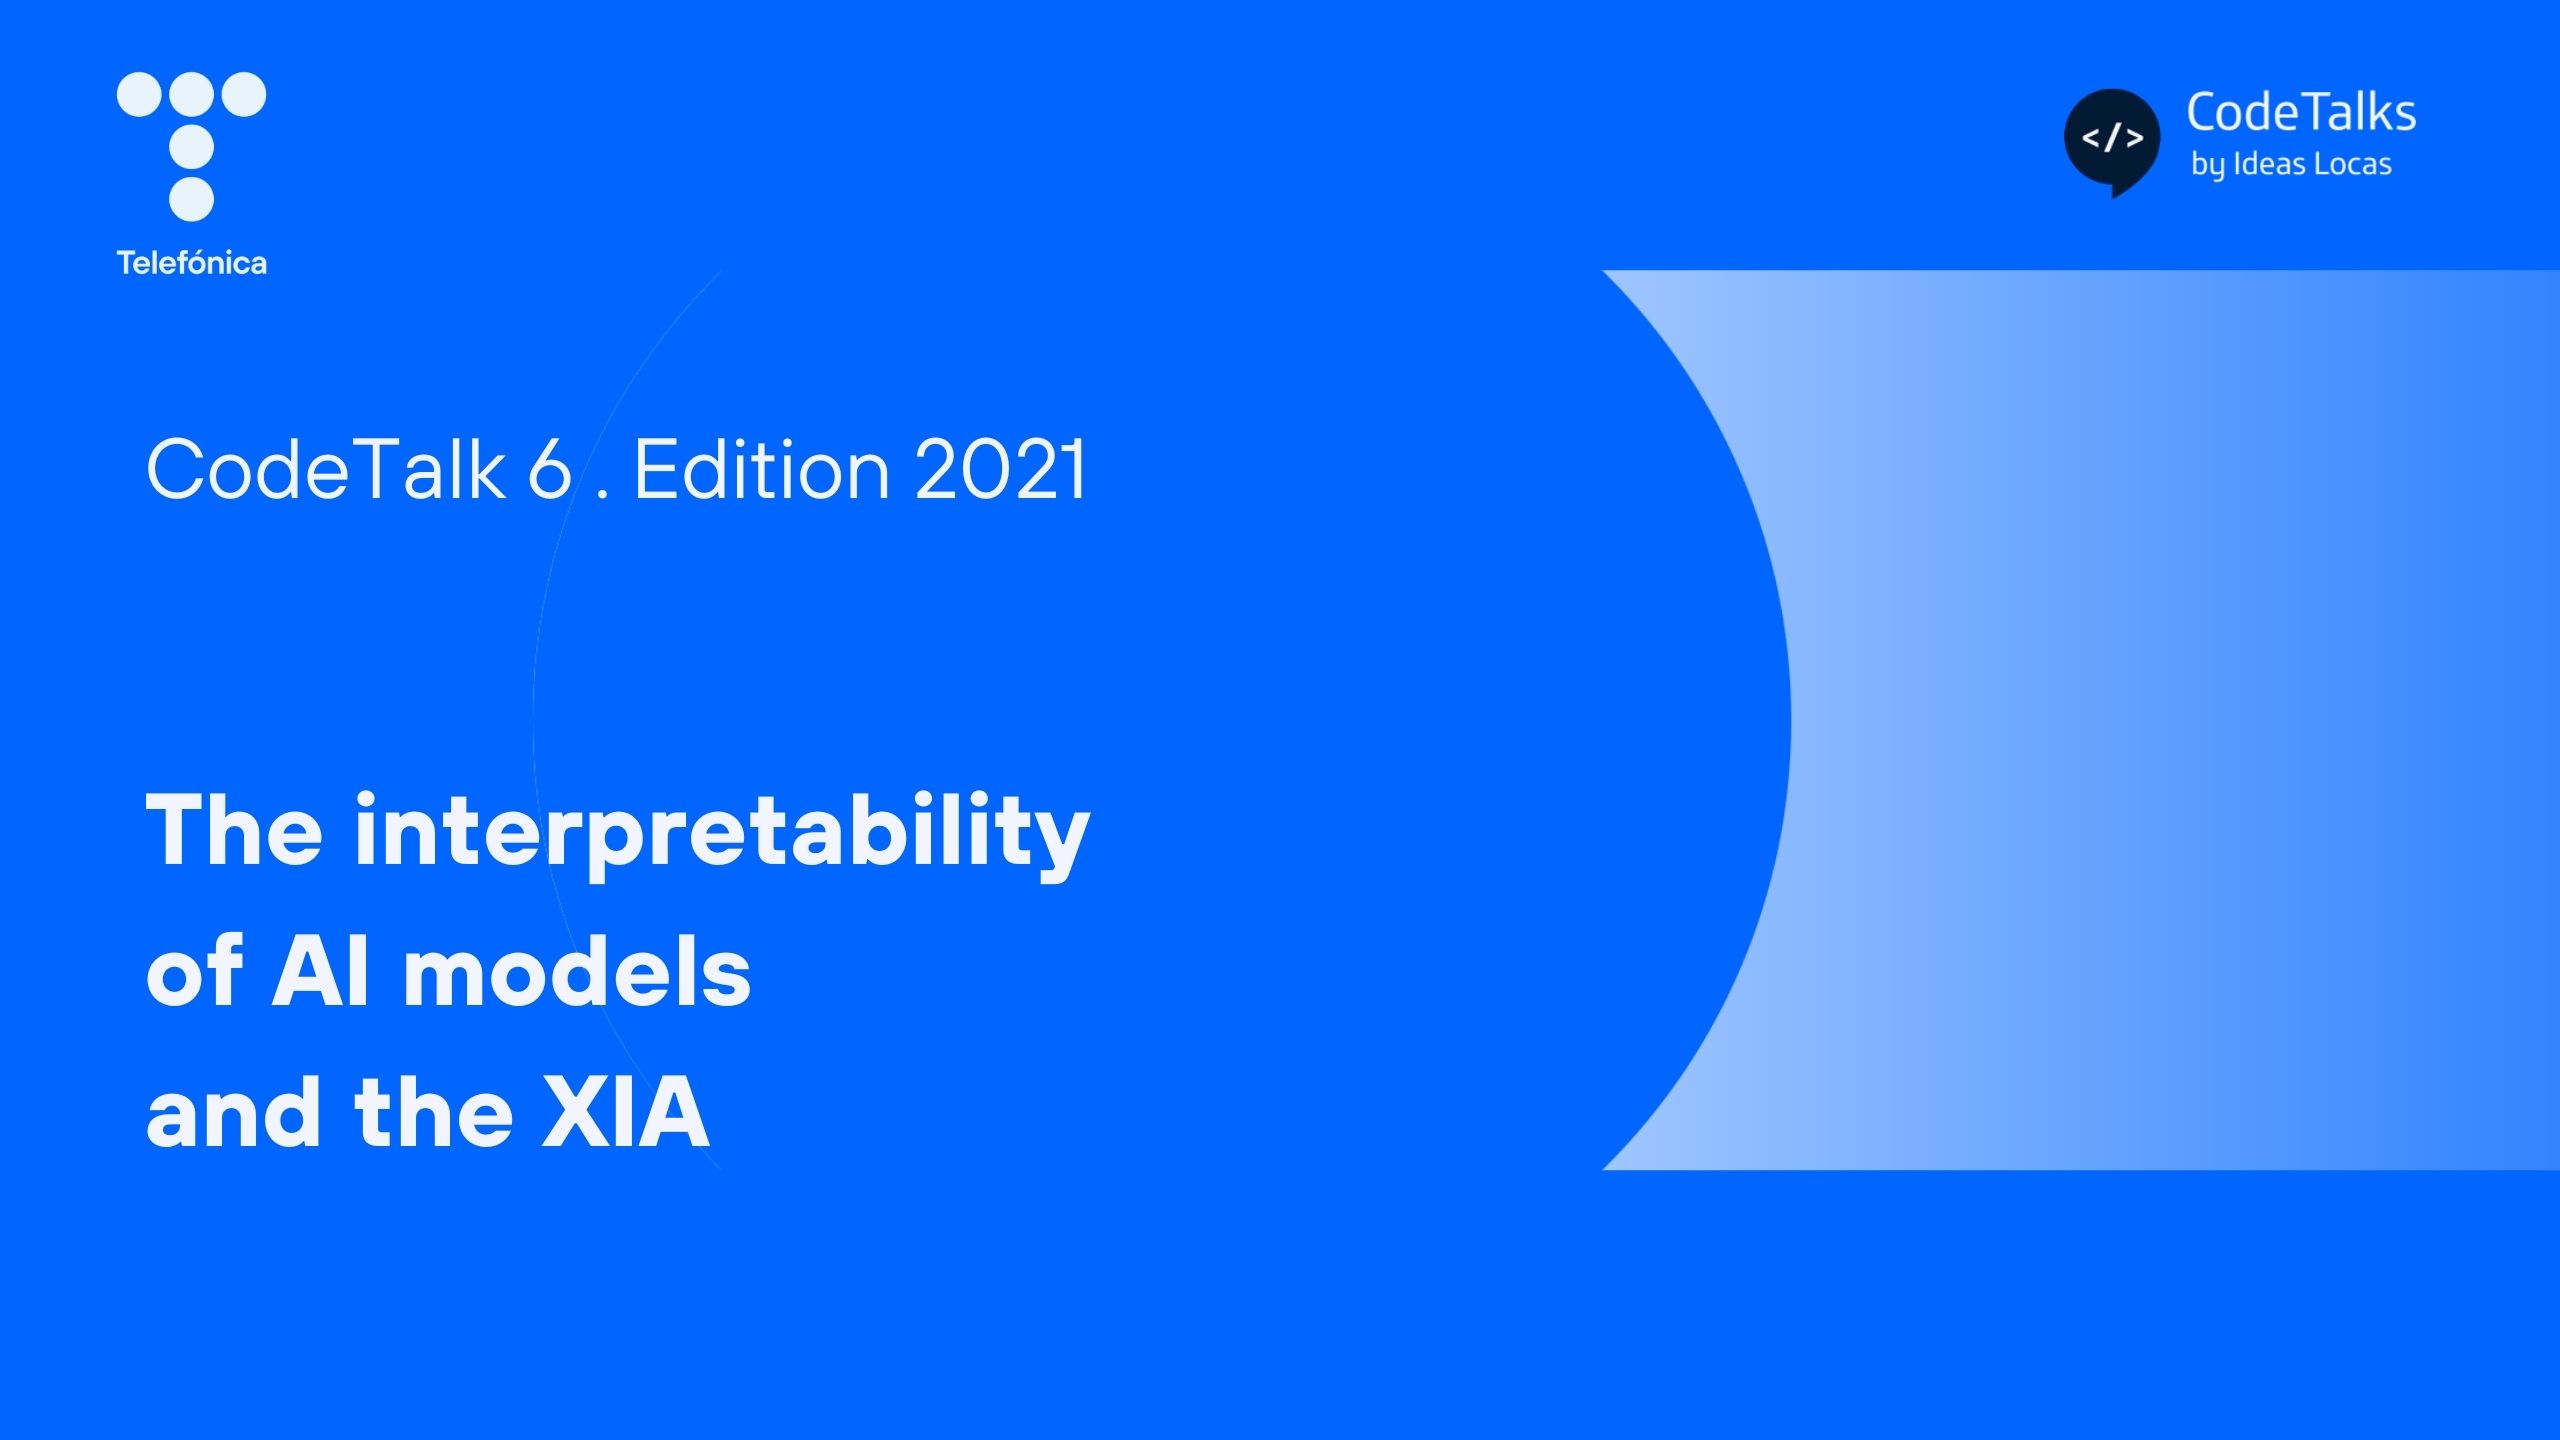 The interpretability of AI models and the XIA